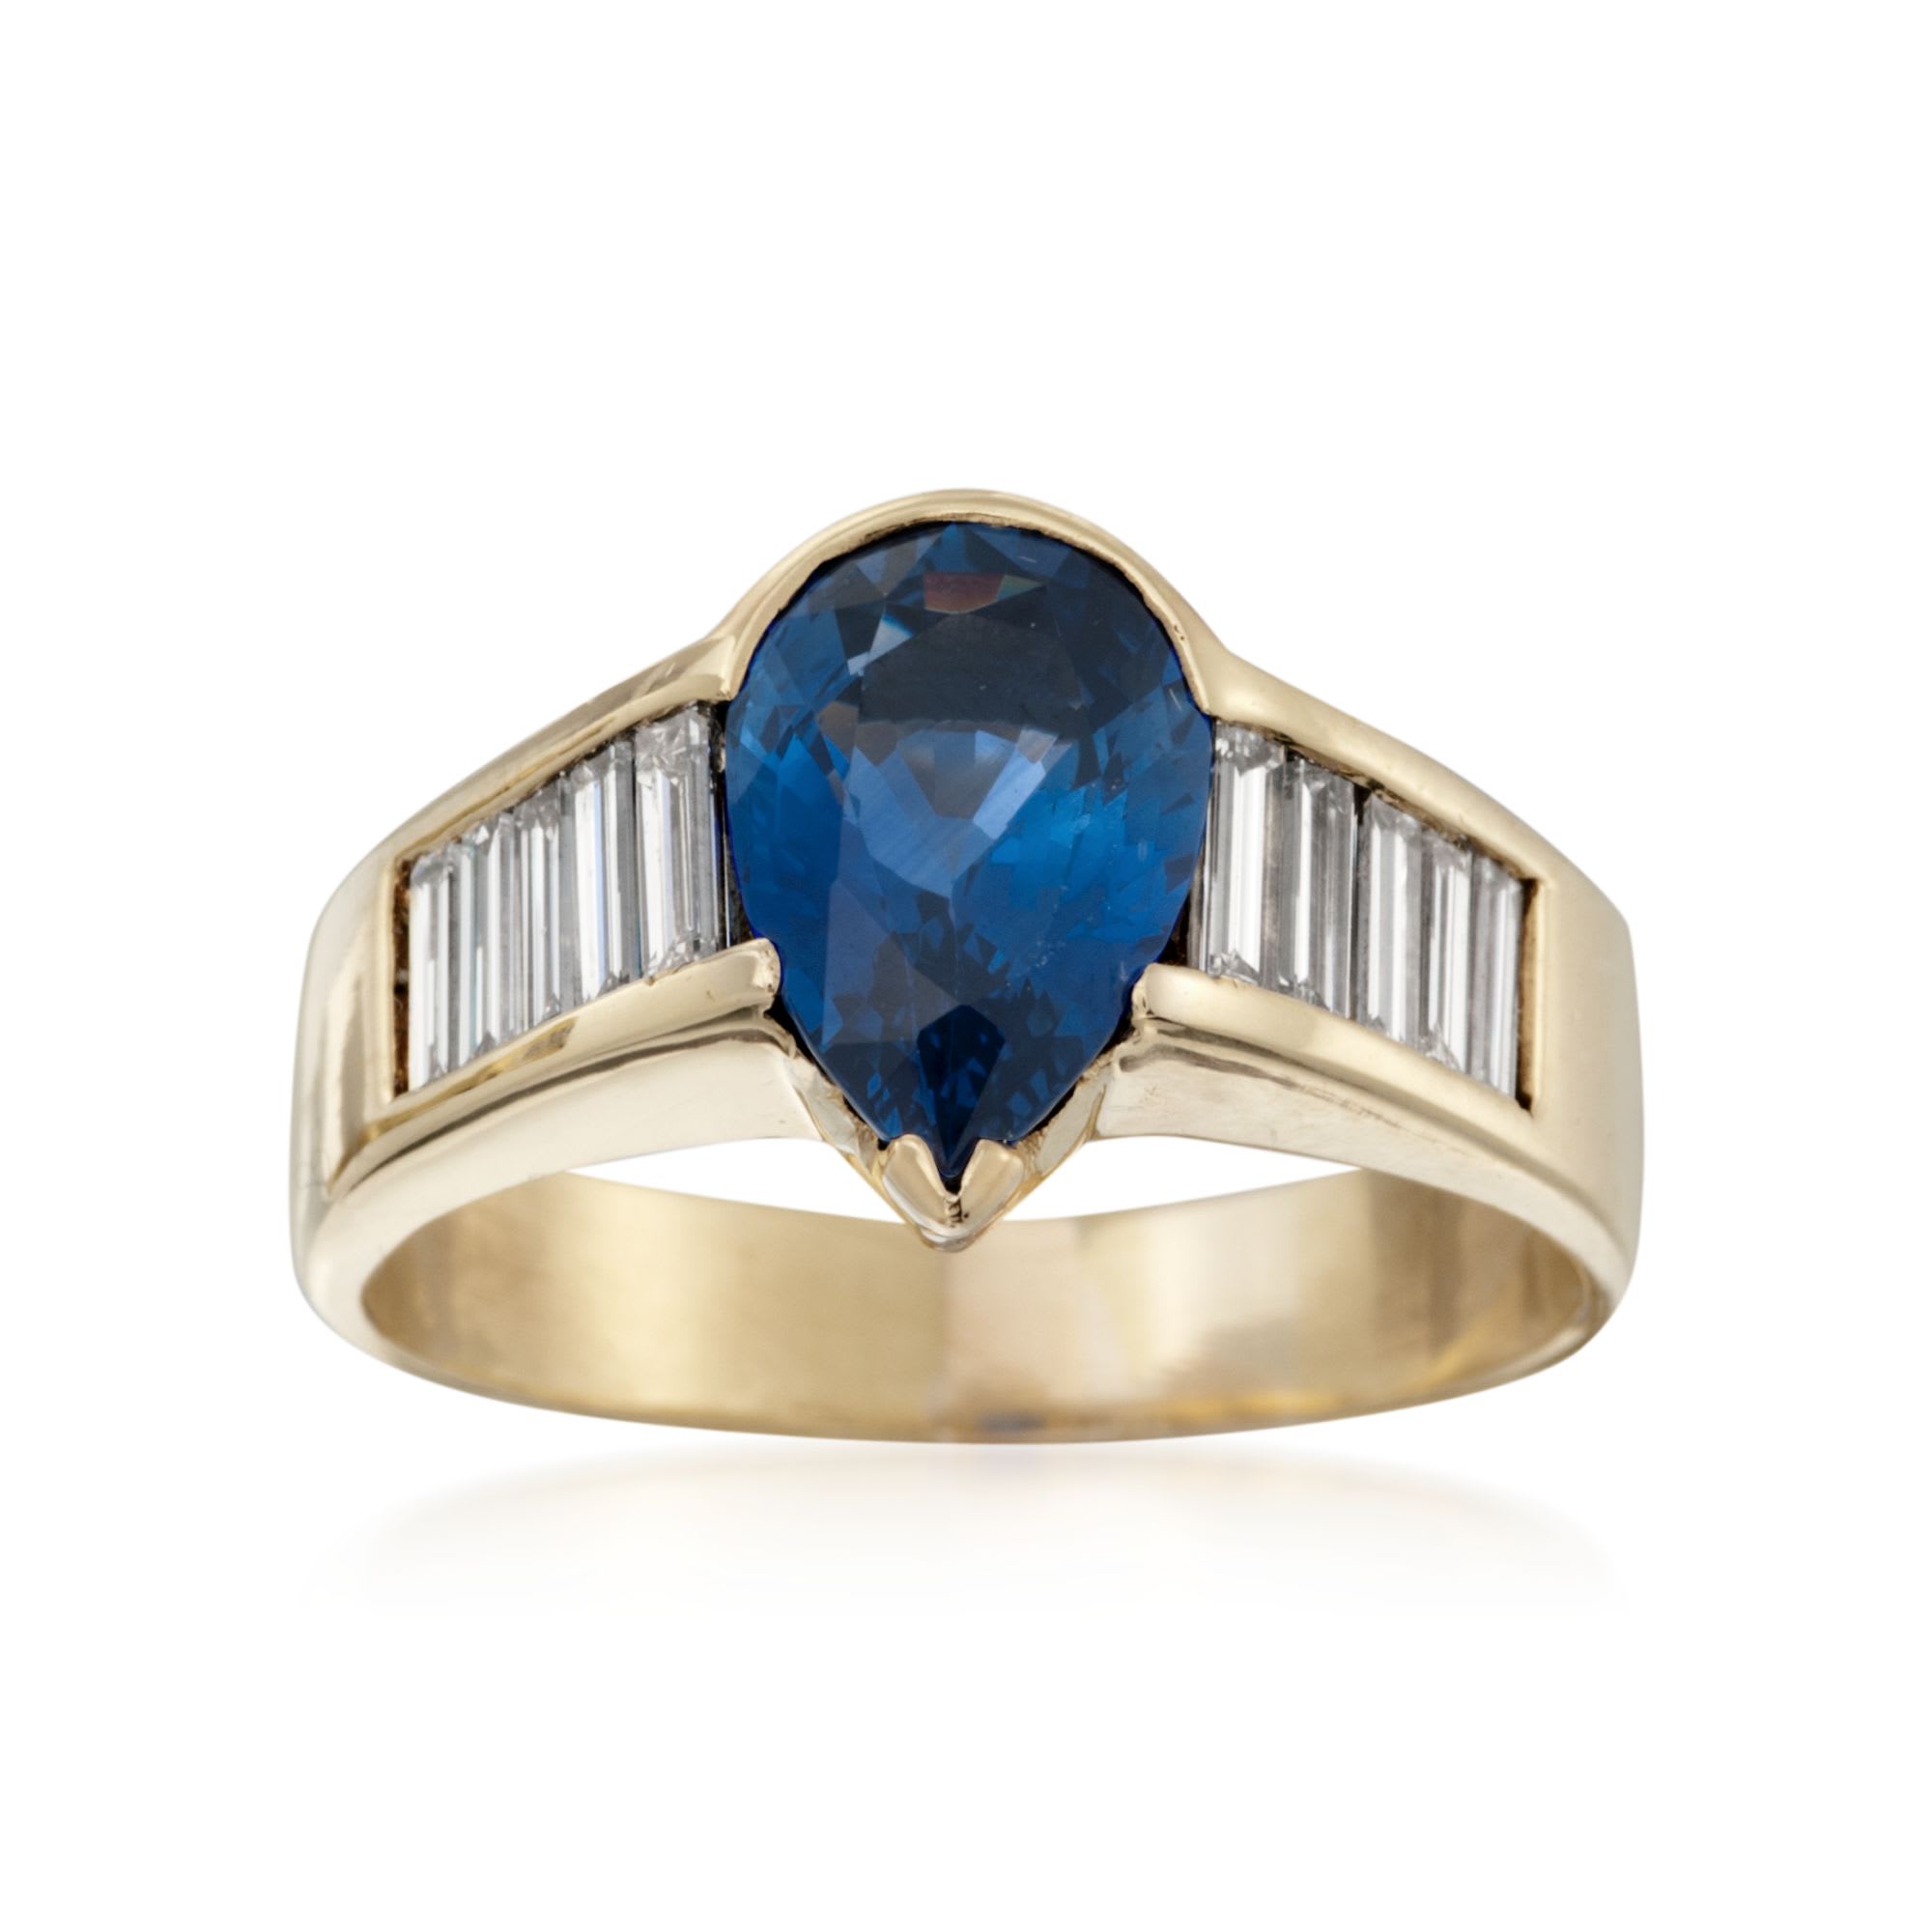 C. 1980 Vintage 2.70 Carat Sapphire and 1.35 ct. t.w. Diamond Ring in ...